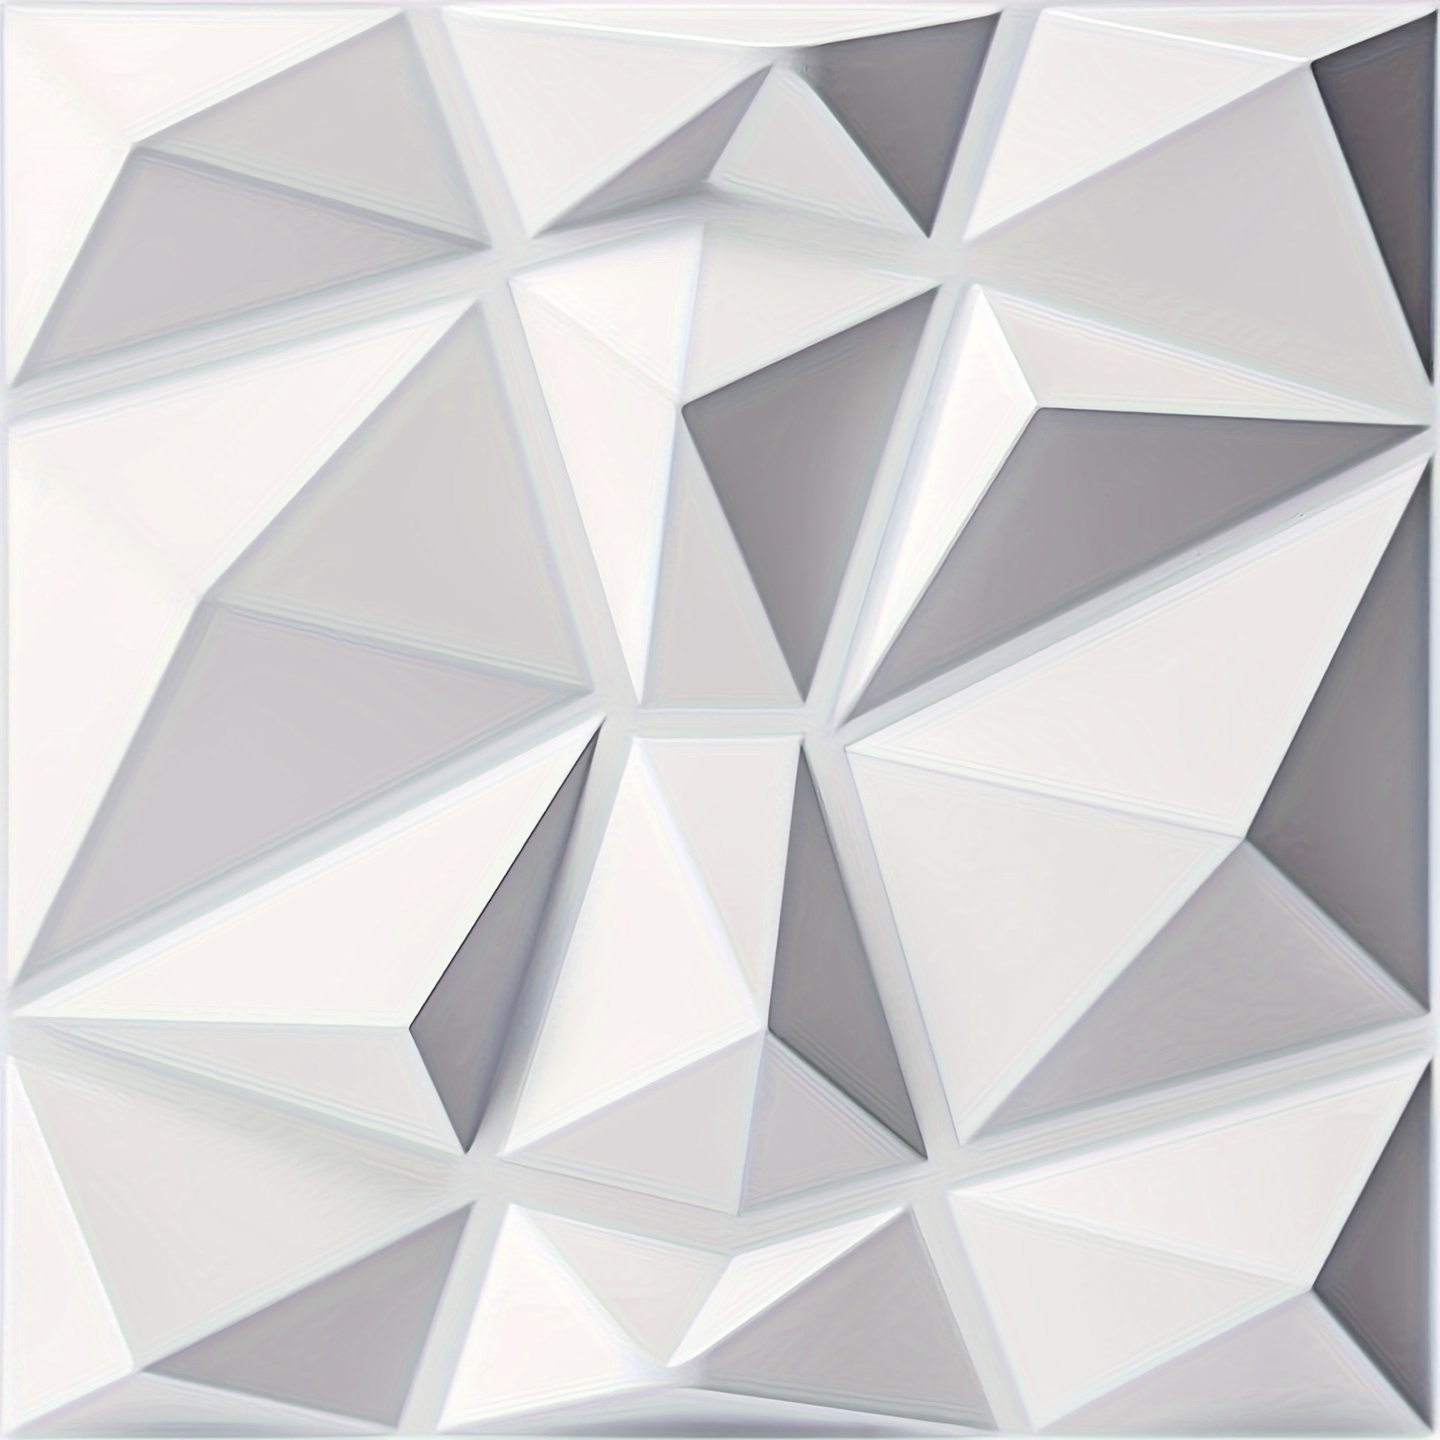 Art3d PVC 3D Diamond Wall Panel Jagged Matching-Matt White, for Residential  and Commercial Interior Decor